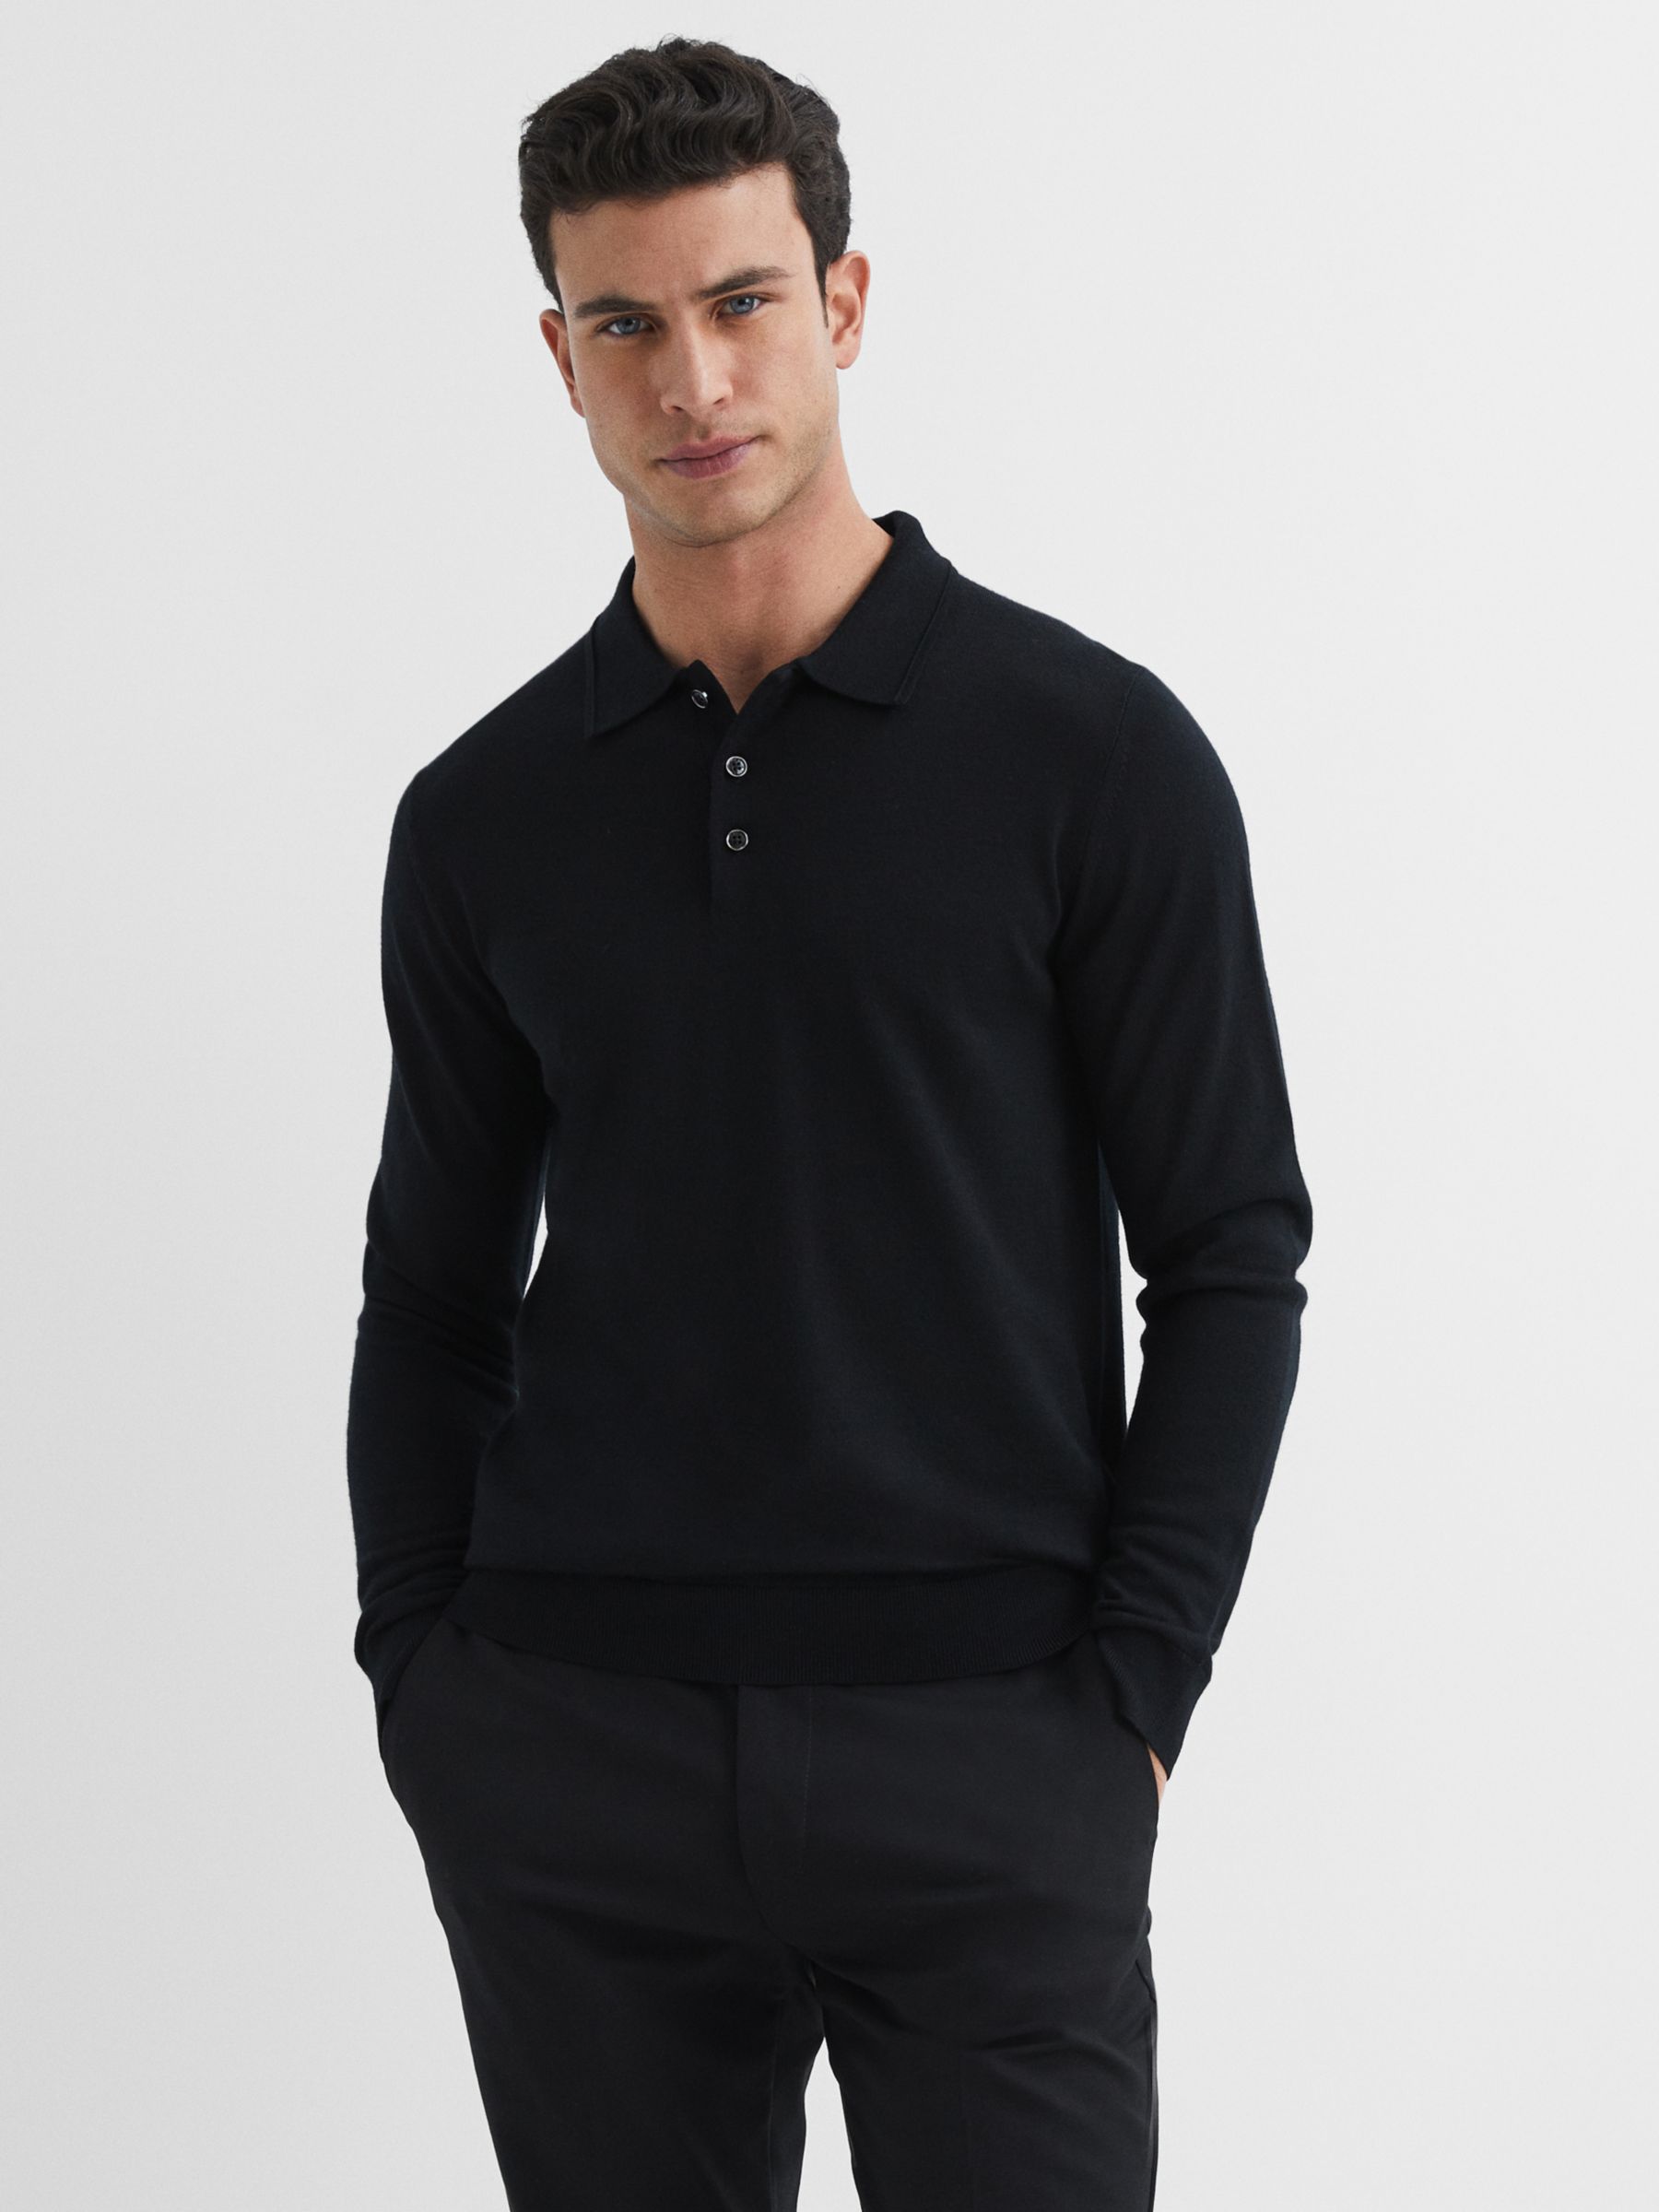 Reiss Trafford Knitted Wool Long Sleeve Polo Top, Black, XS